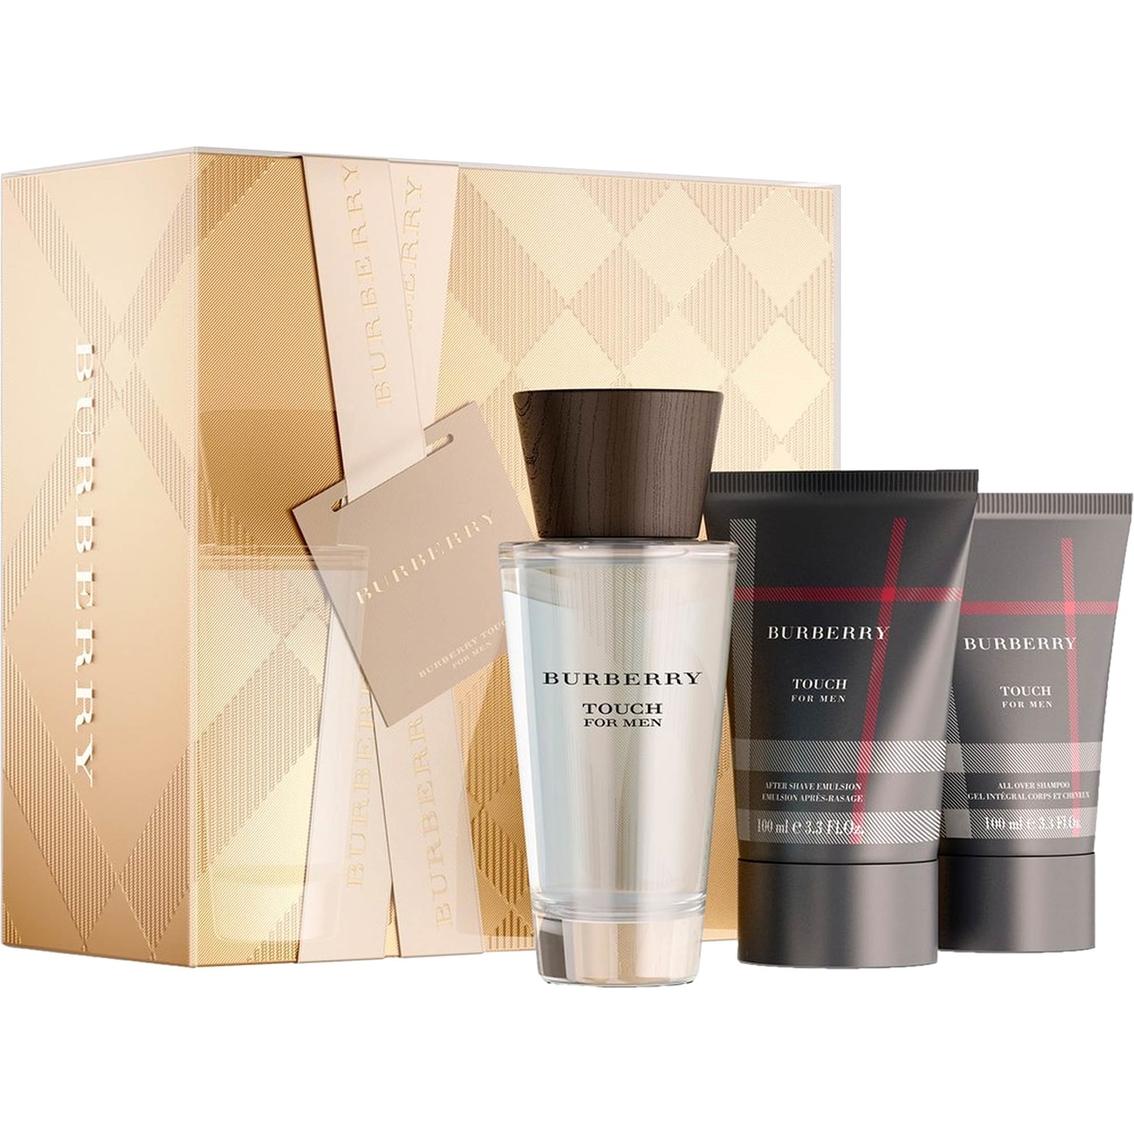 Burberry Touch For Men Gift Set | Gifts 